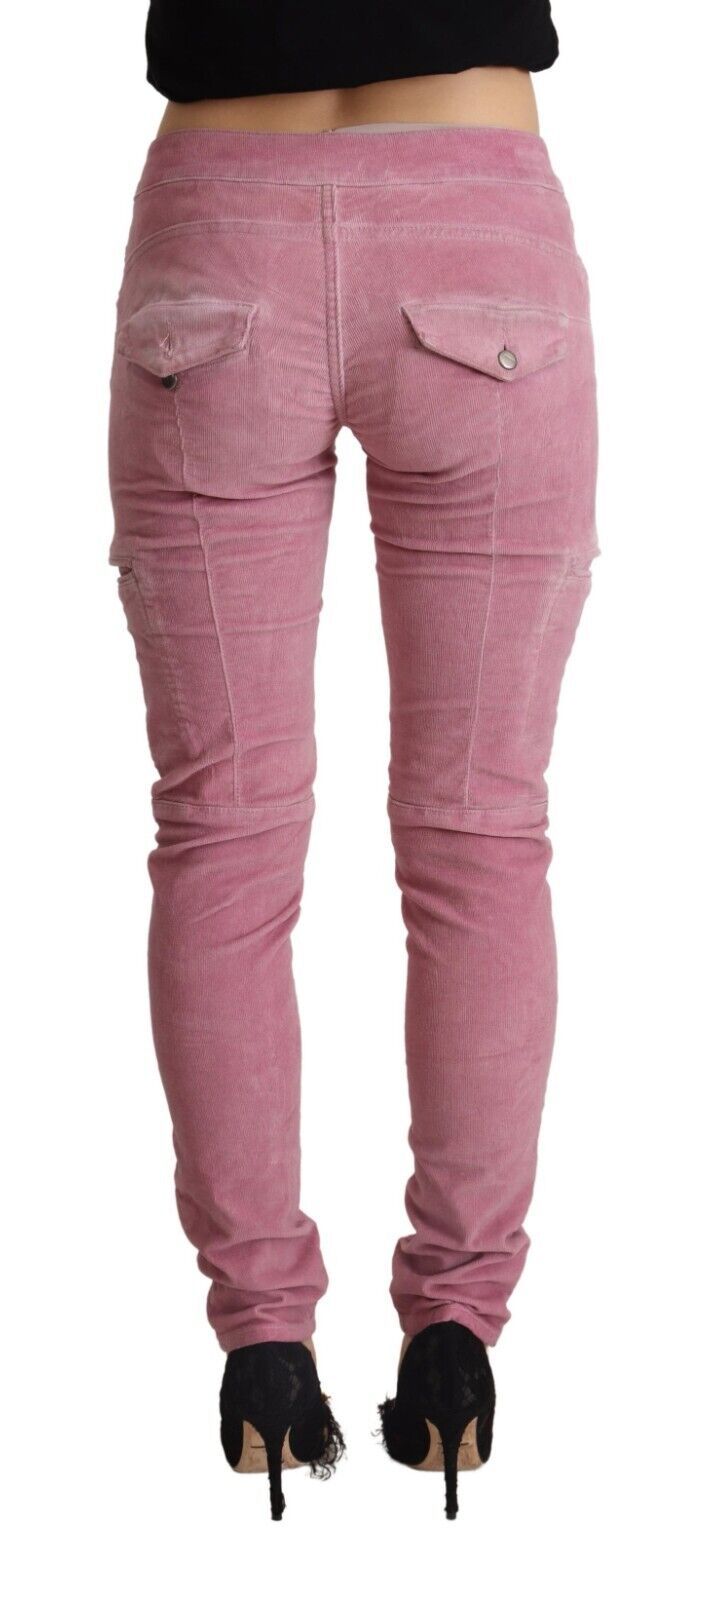 Acht Chic Pink Low Waist Skinny Jeans